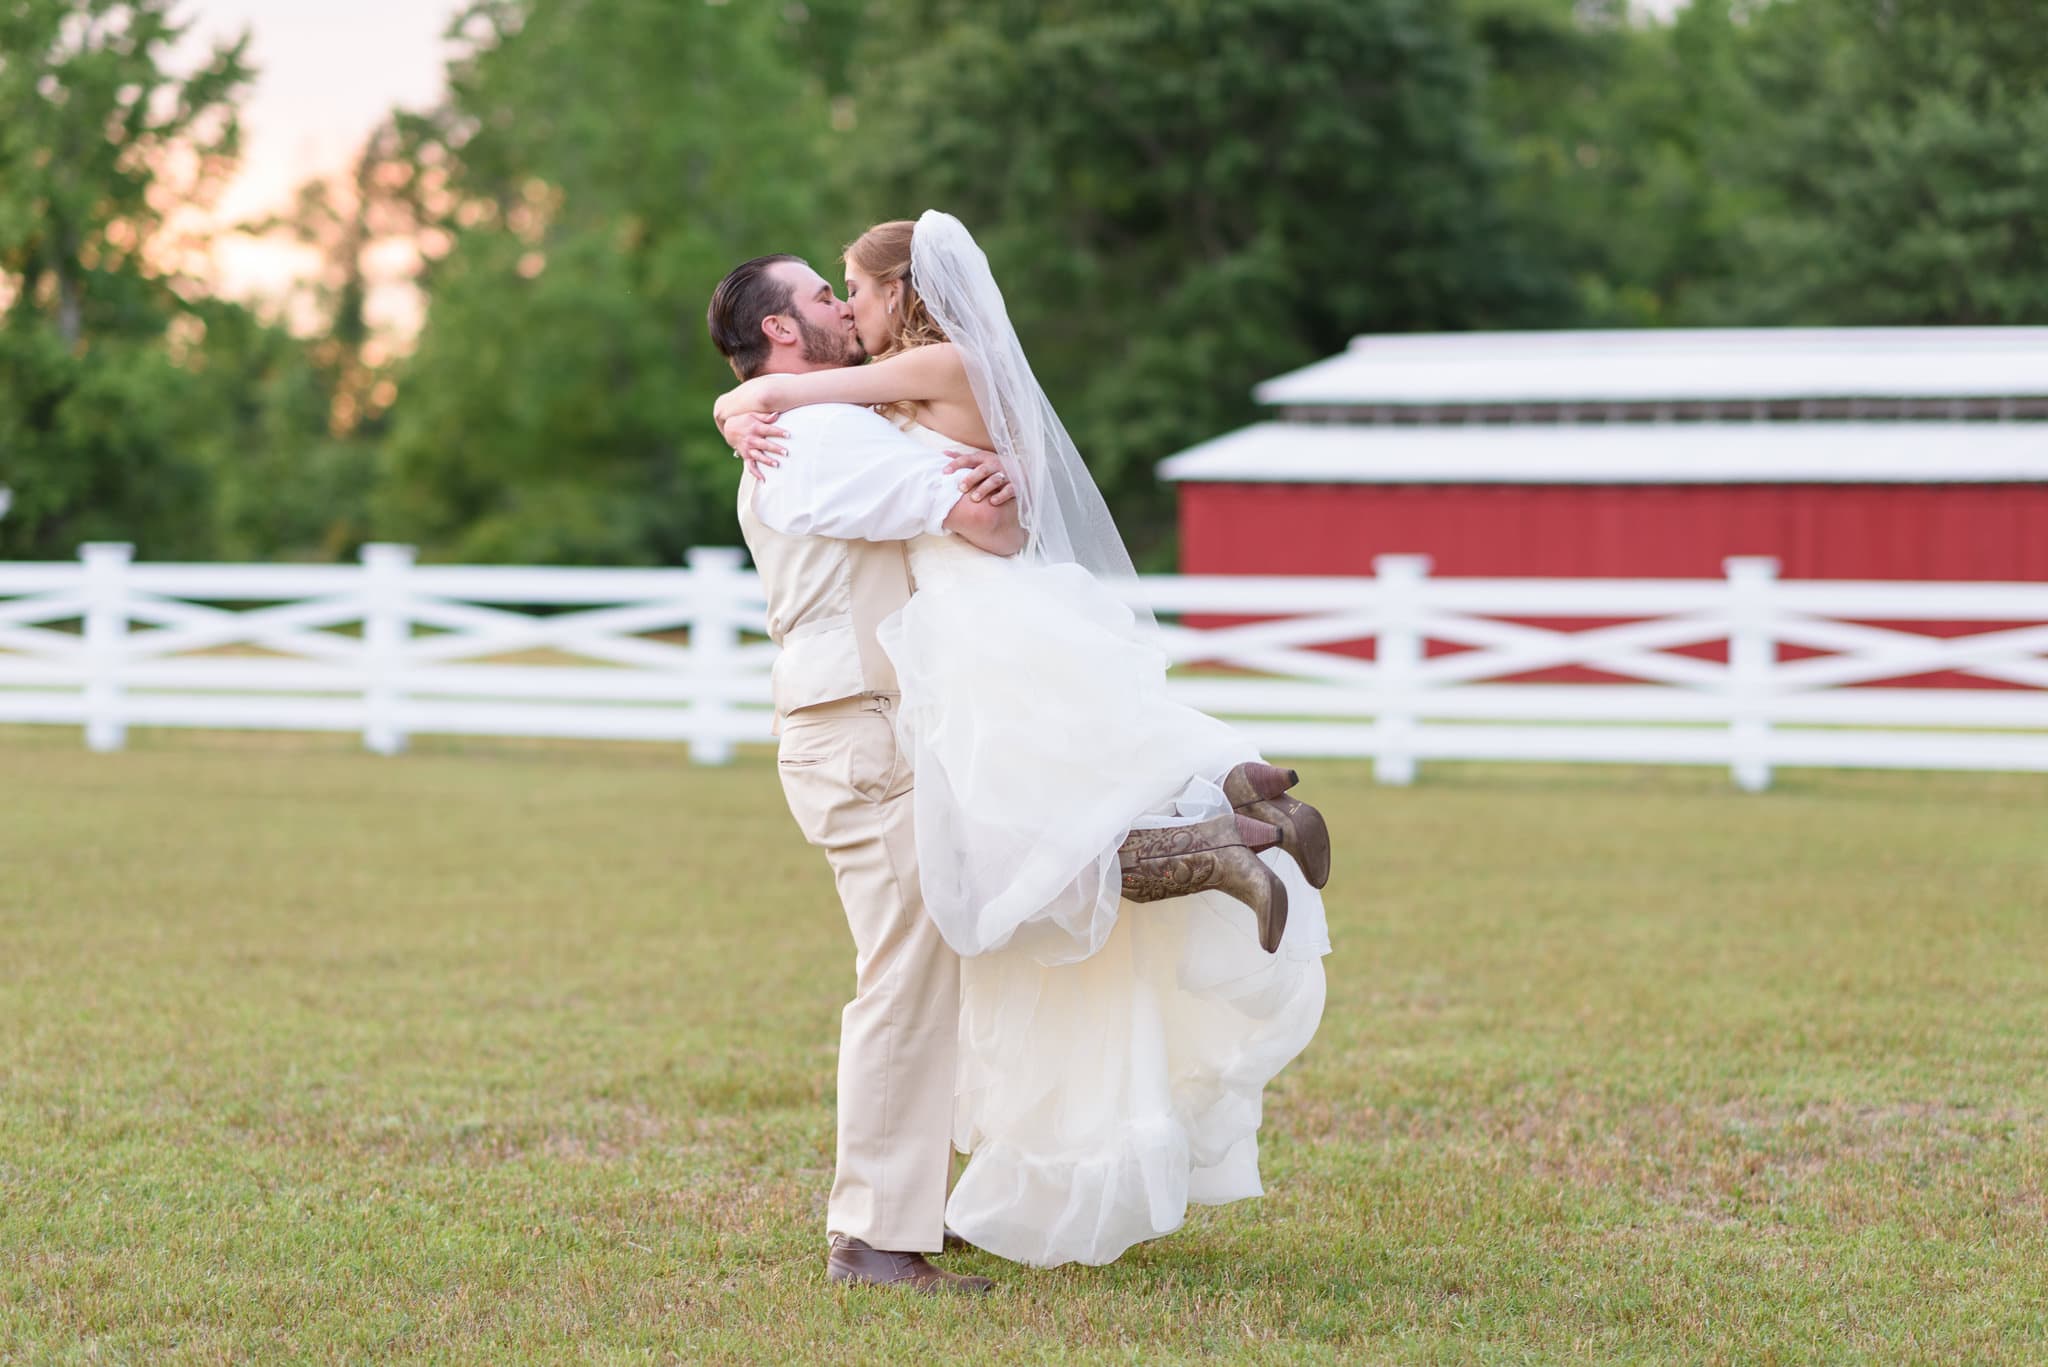 Lifting bride into the air for a kiss - Wildberry Farm